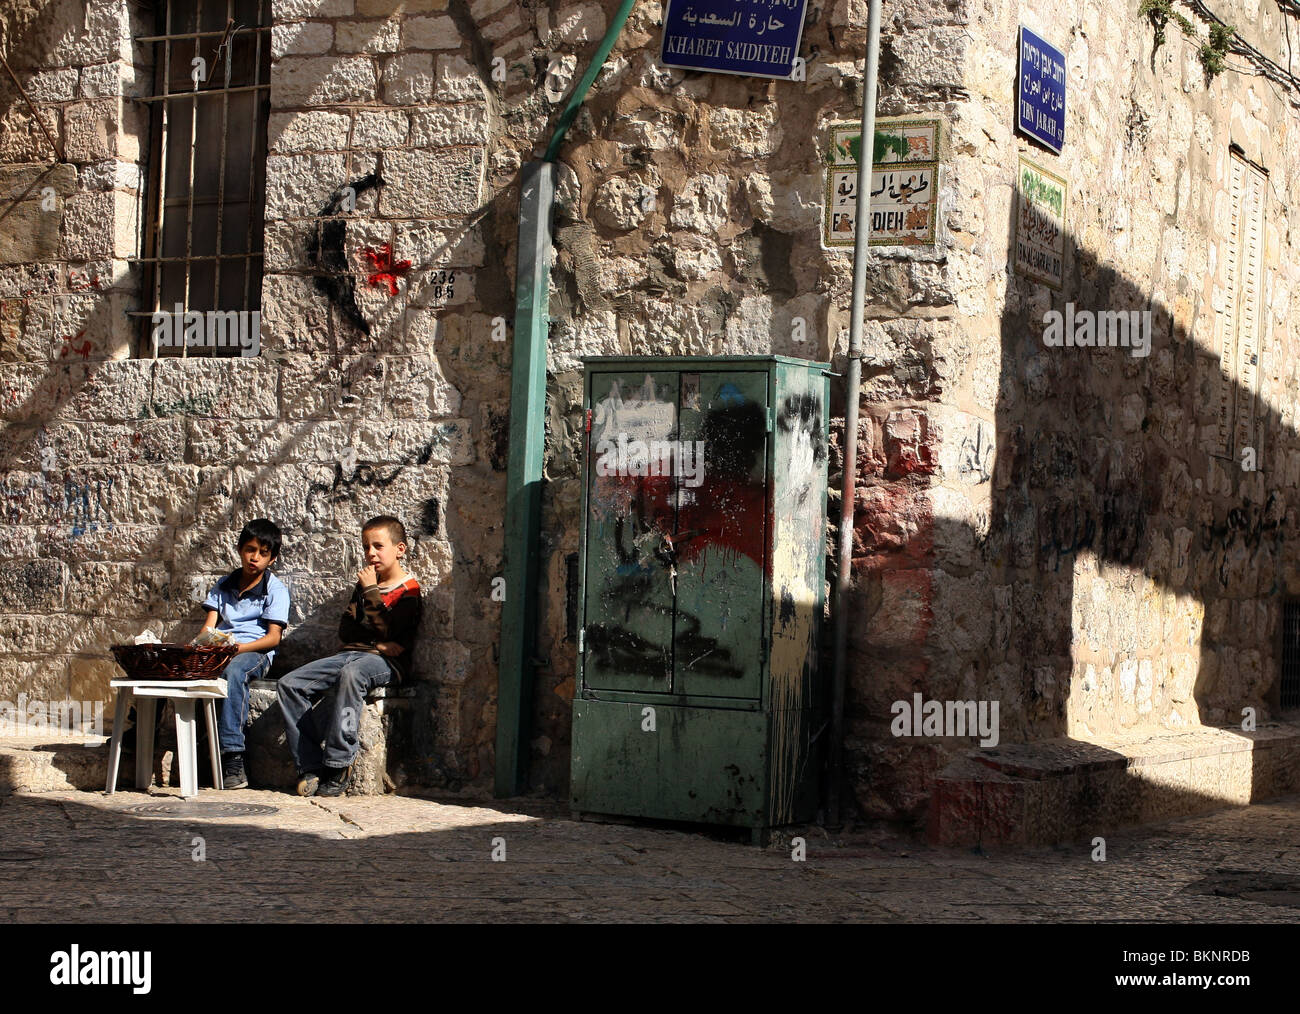 Two young boys are pictured selling popcorn in the Muslim Quarter of the Old City of Jerusalem in Israel. Stock Photo